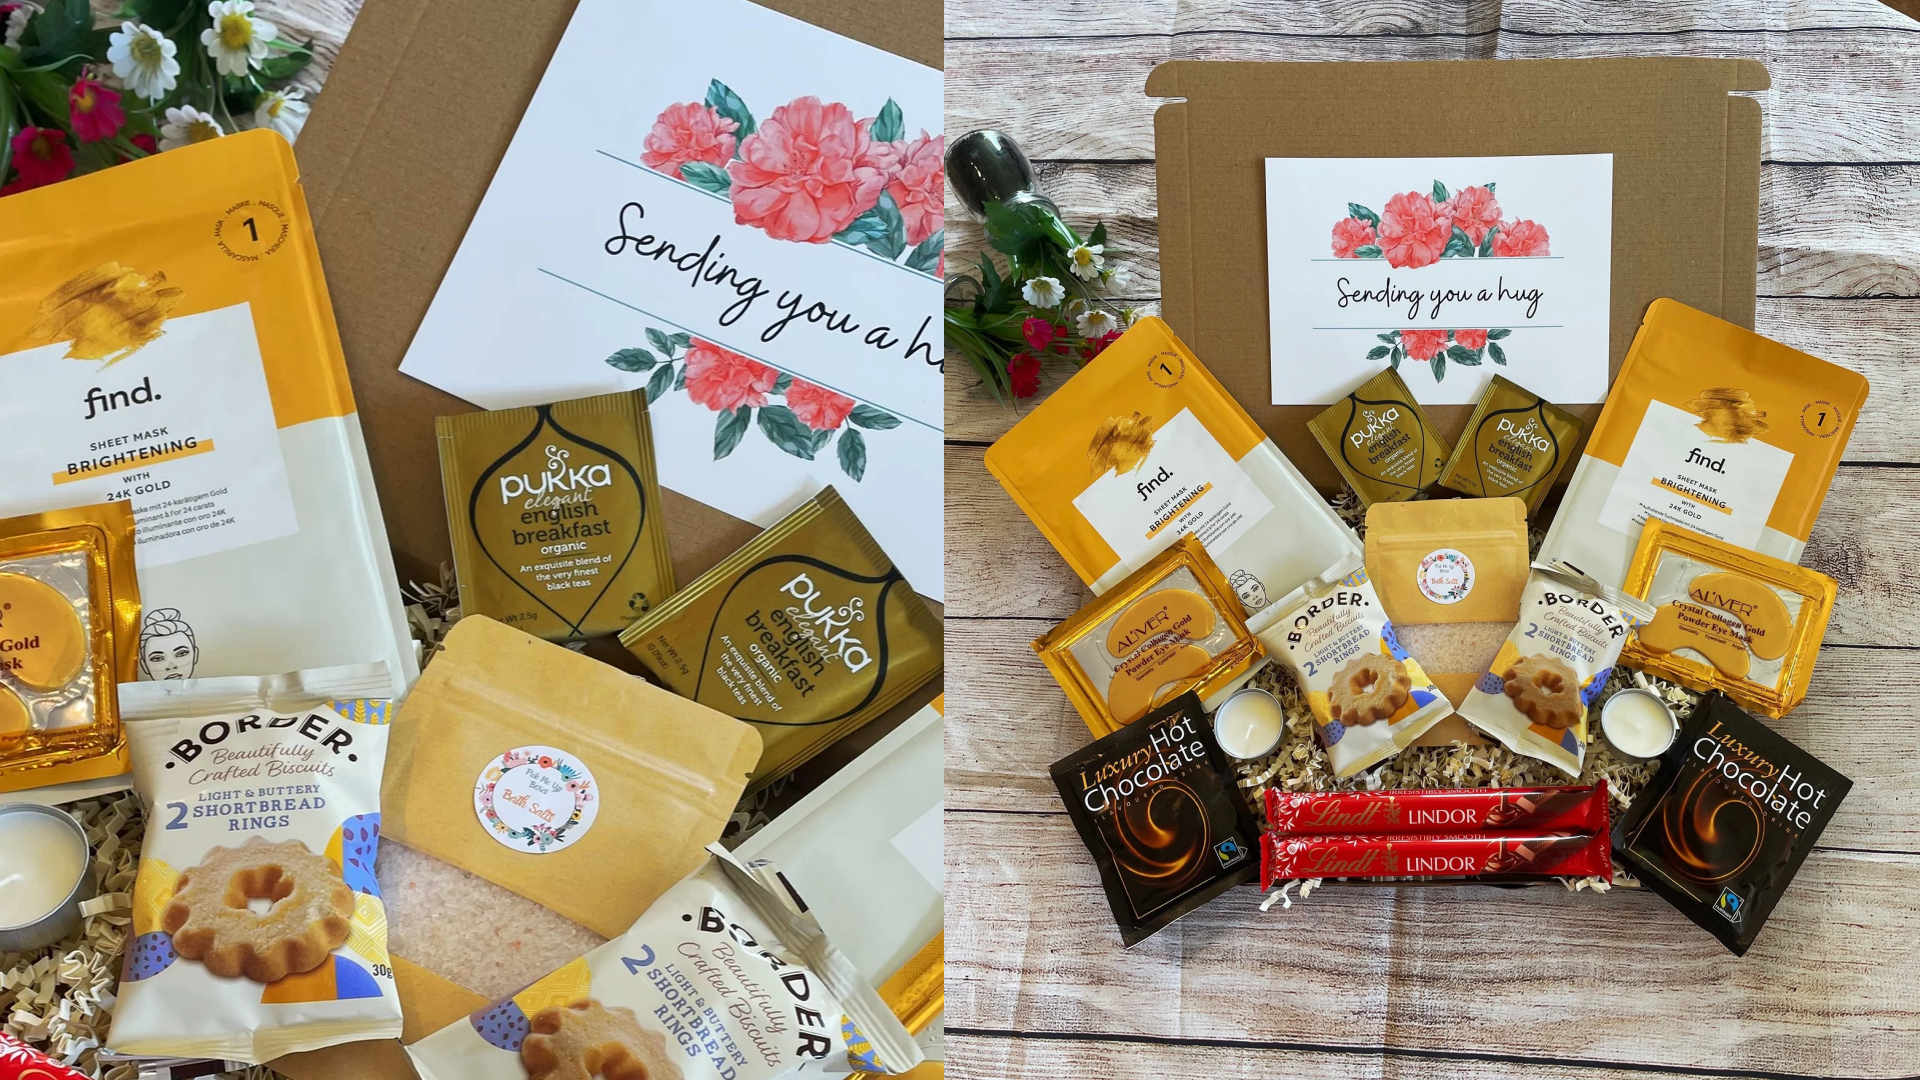 pamper box filled with snacks and self-care goodies